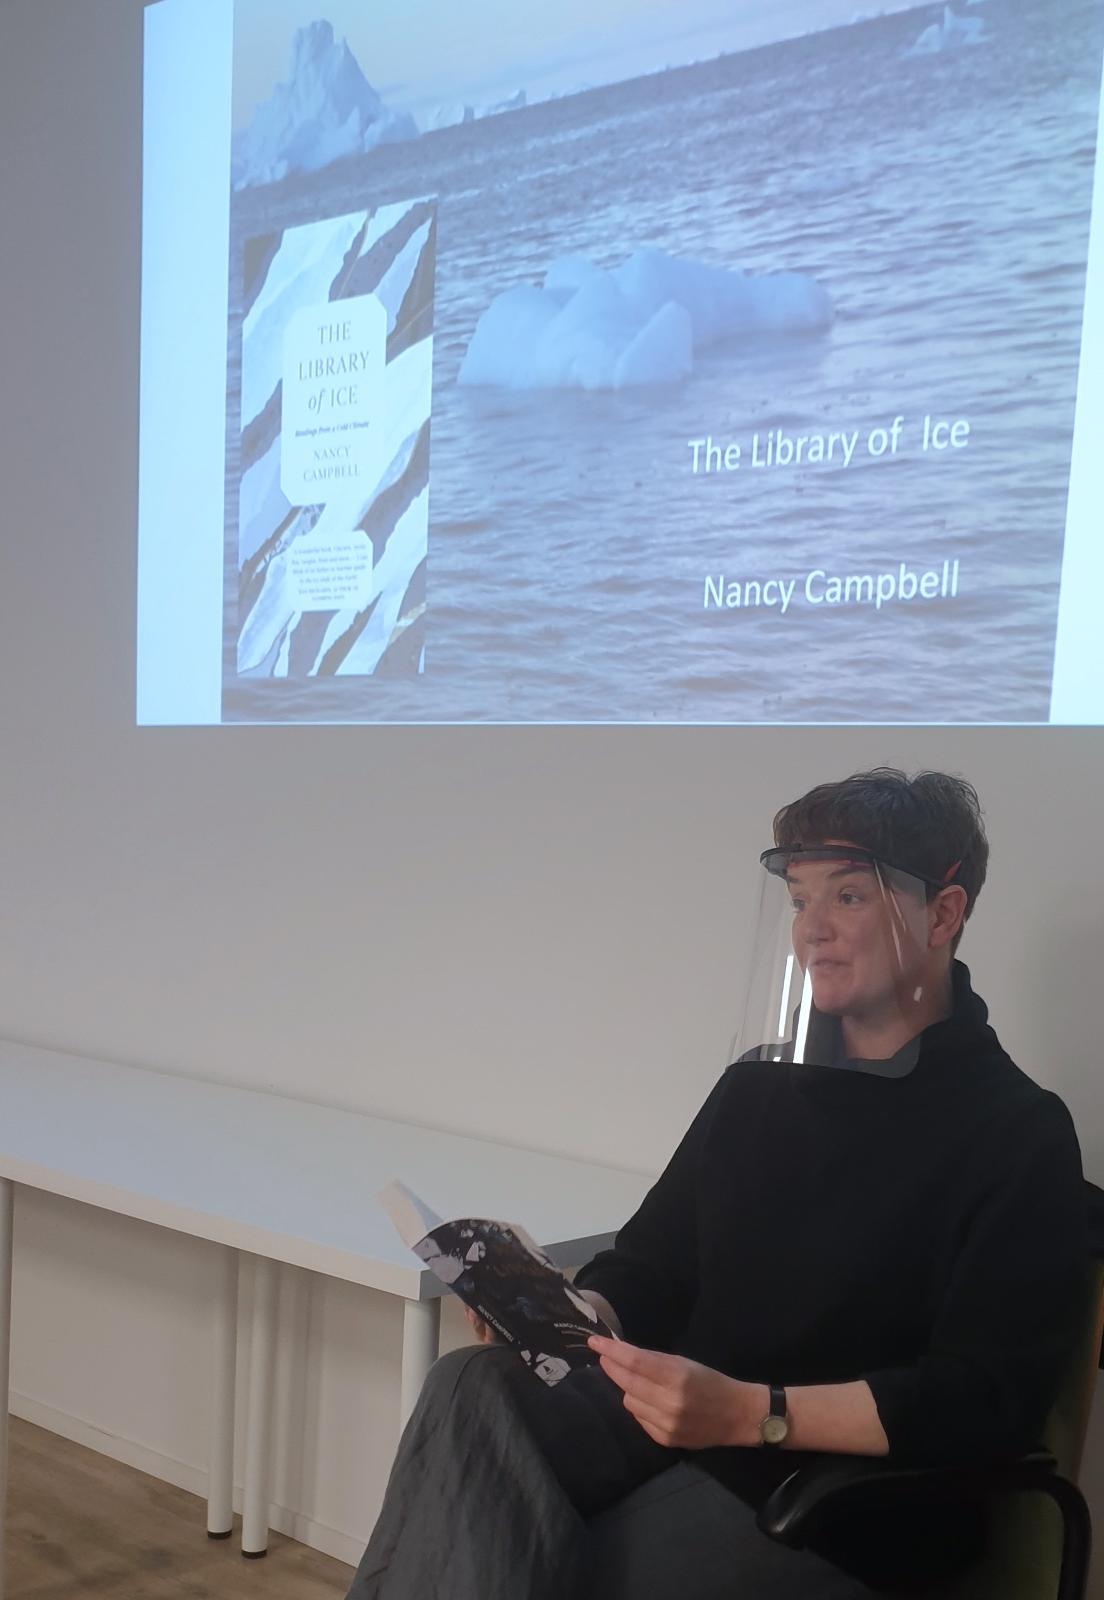 Presentation of the book The Library of Ice by Nancy Campbell